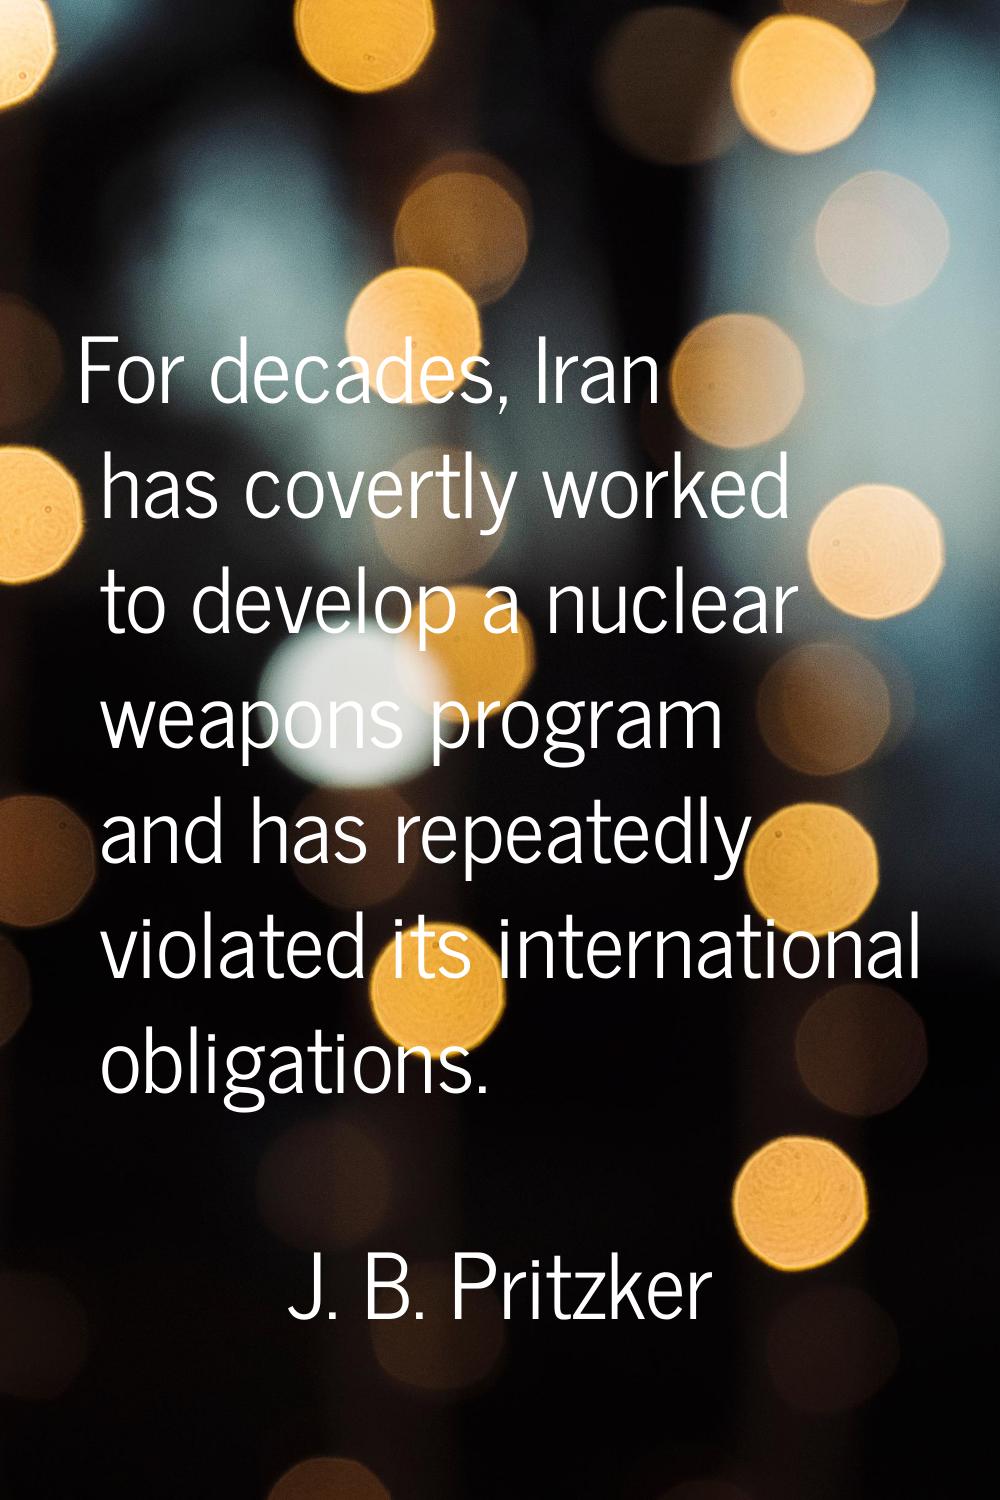 For decades, Iran has covertly worked to develop a nuclear weapons program and has repeatedly viola